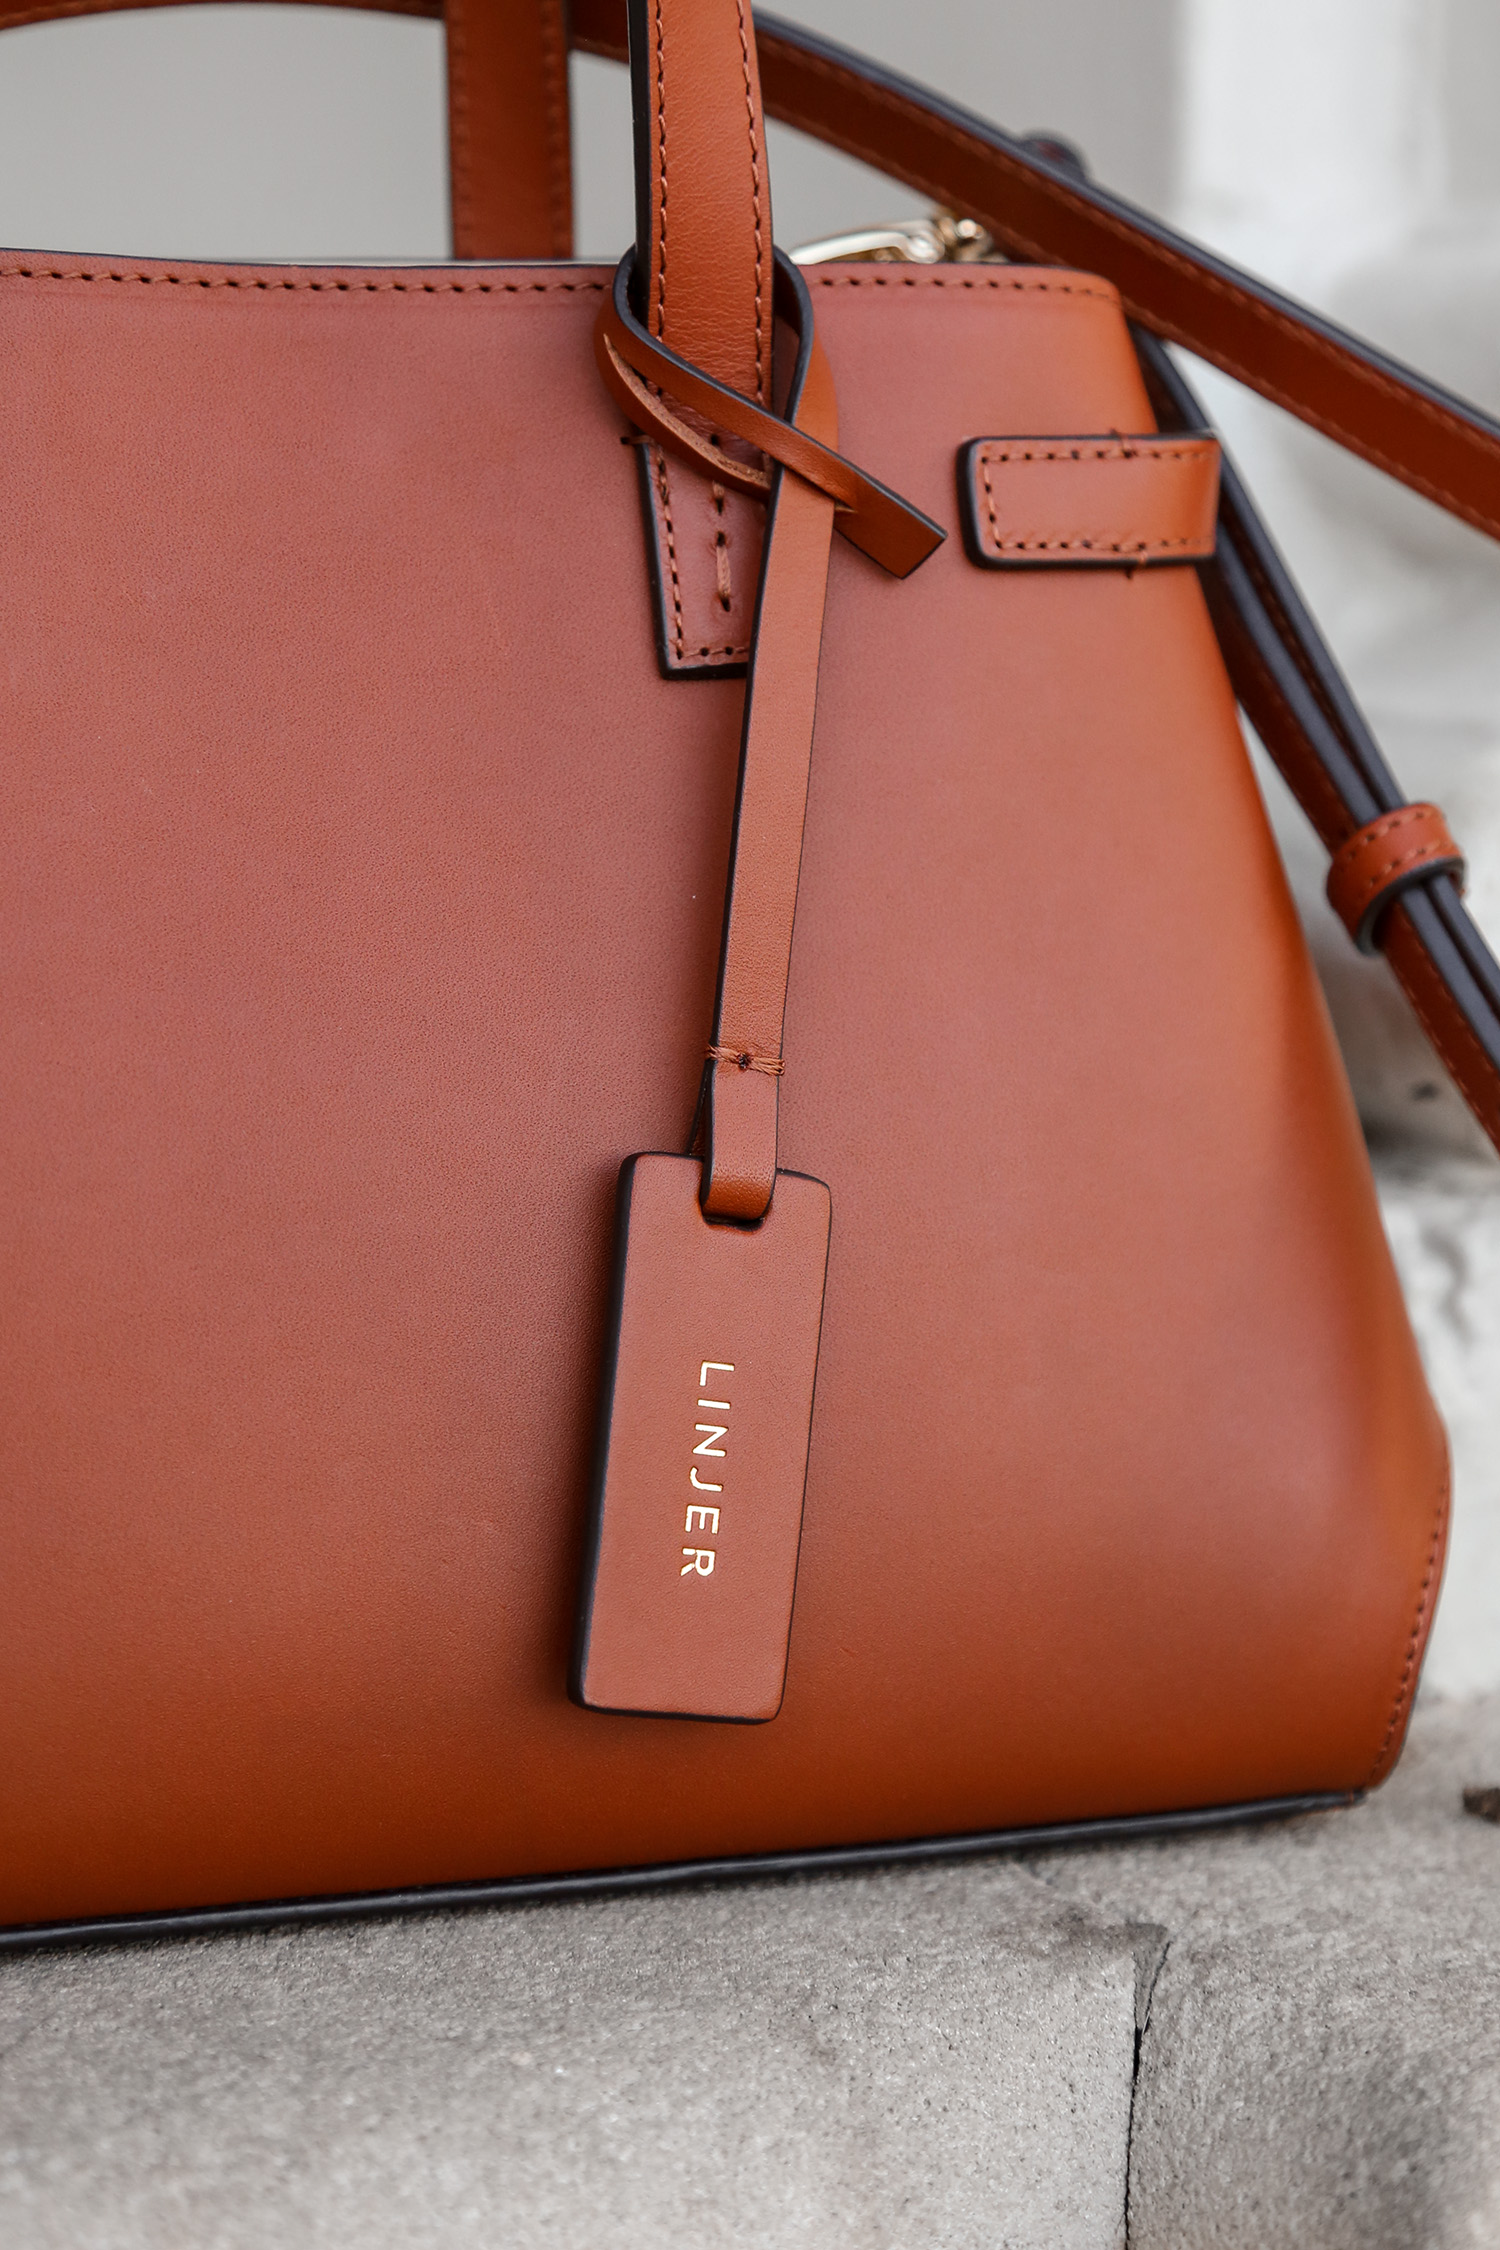 Linjer Crossbody Purse Review & What Fits Inside - Mademoiselle